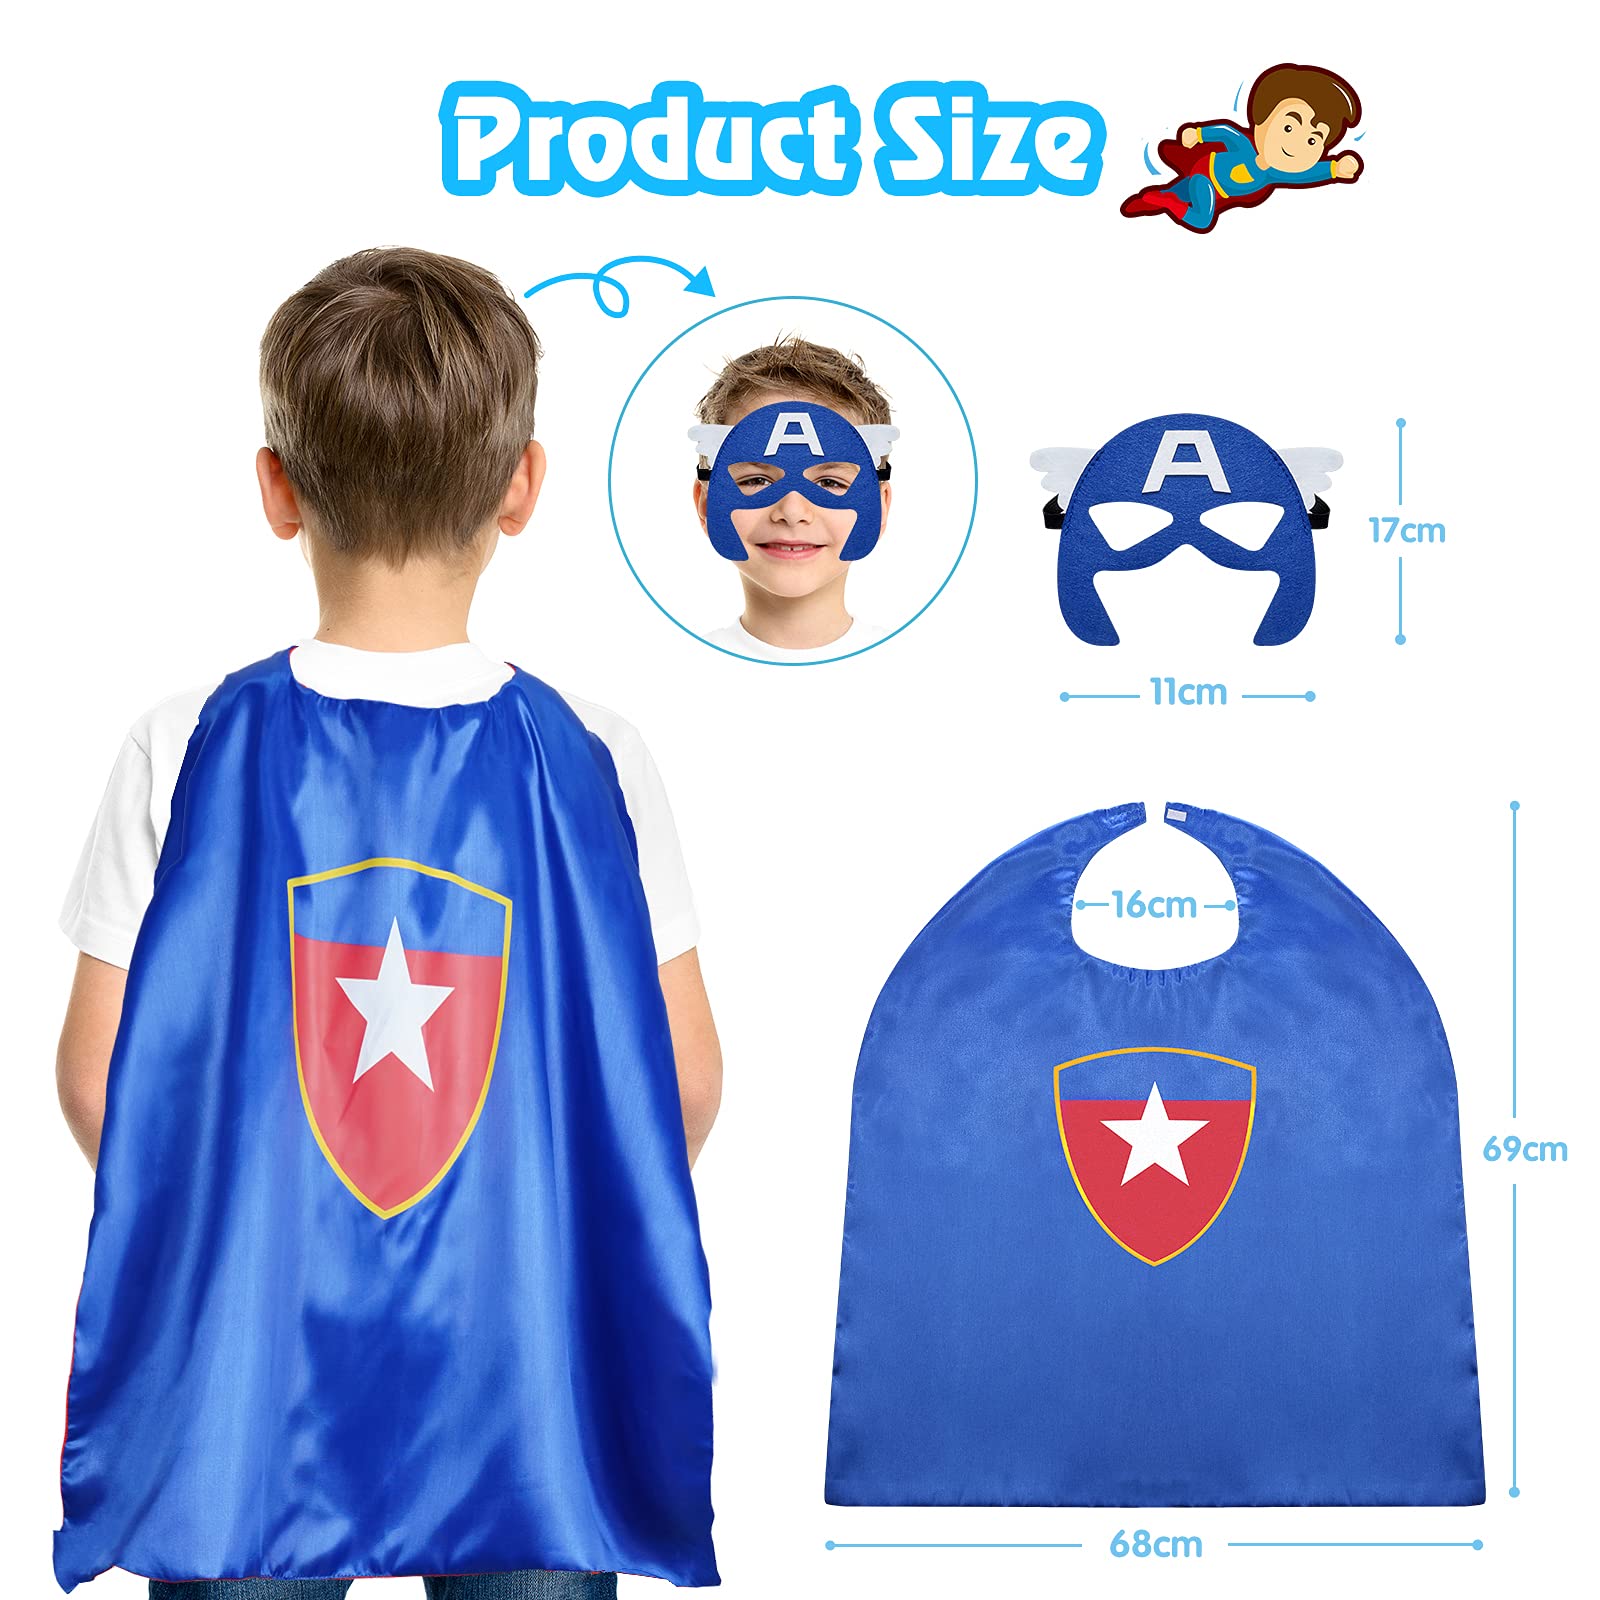 Roko Toys for 3-10 Year Old Boys, Superhero Capes for Kids 3-10 Year Old Boy Gifts Boys Cartoon Dress up Costumes Party Supplies Easter Gifts Kids Capes Superhero Capes